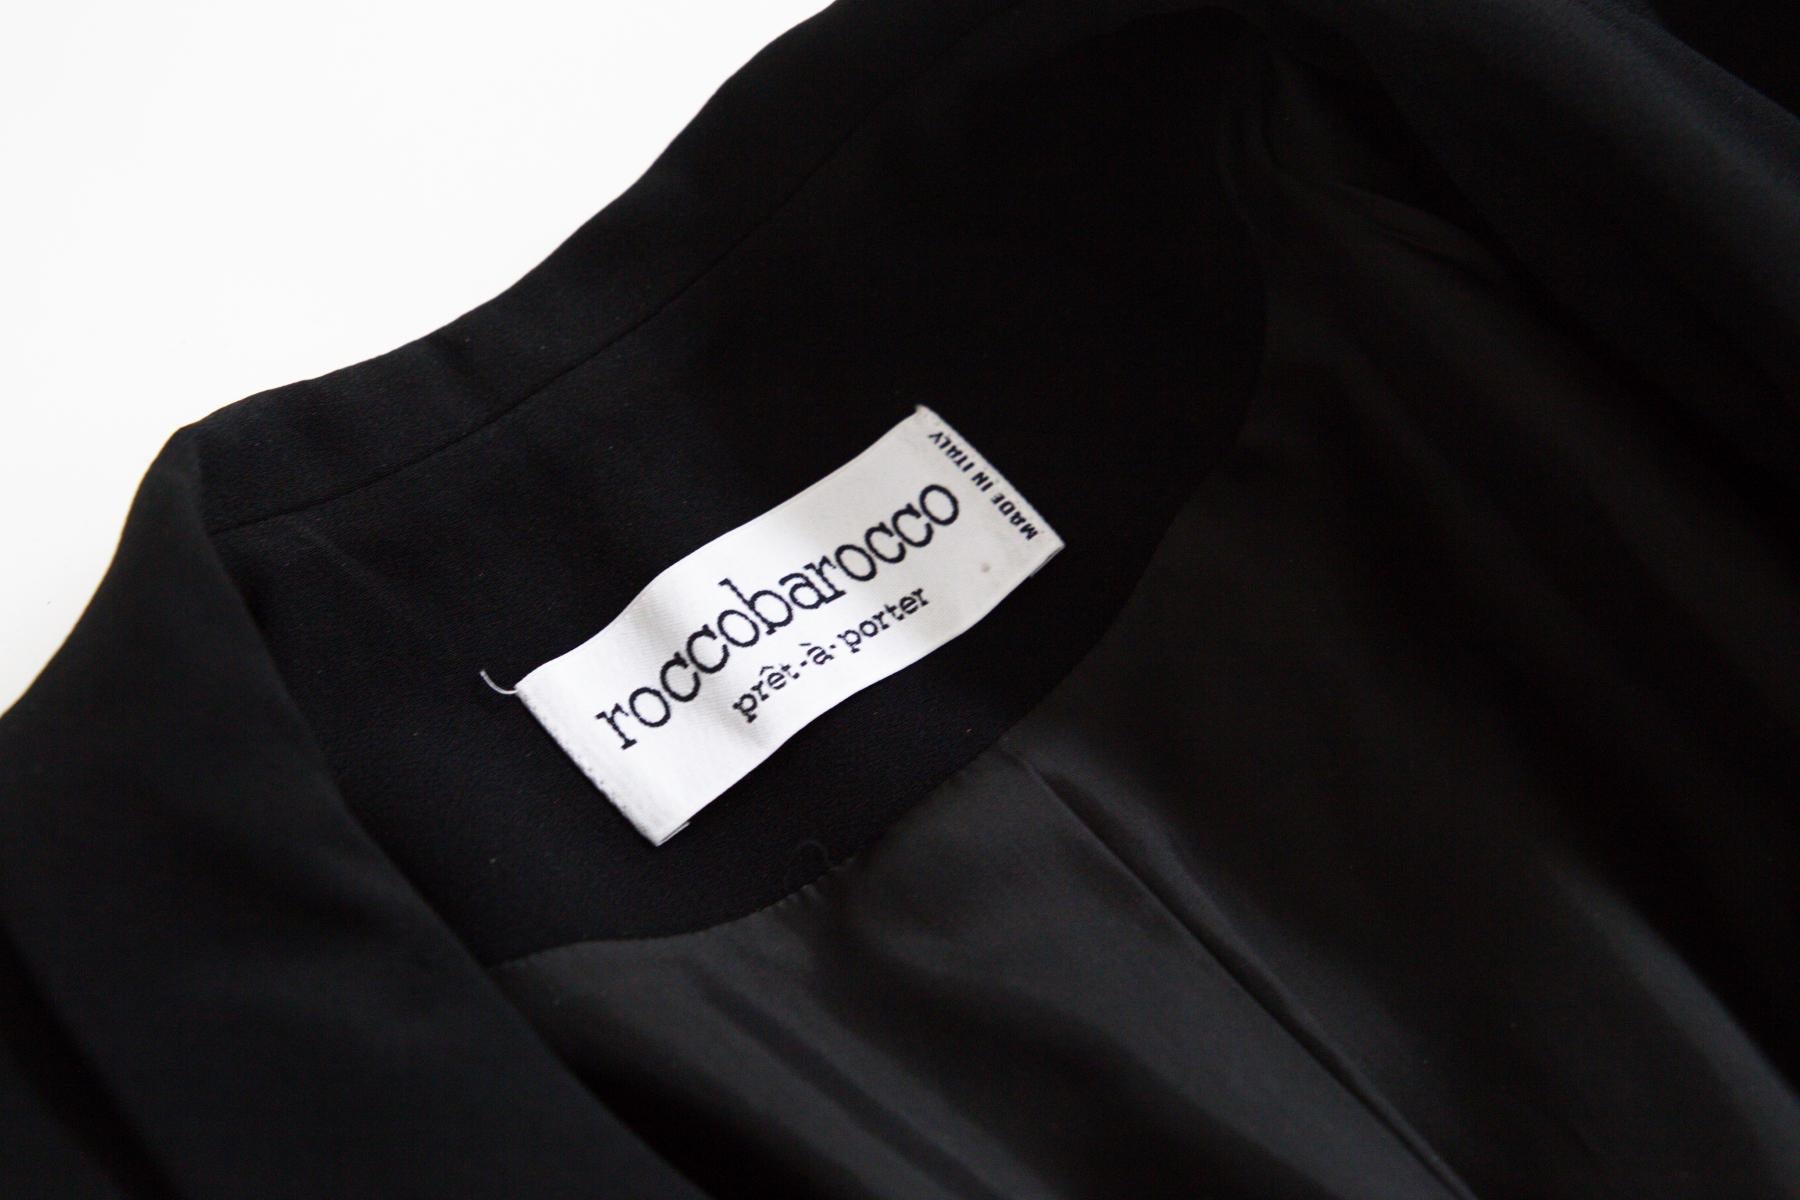 Beautiful elegant blazer from the 1990s by Rocco Barocco, made in Italy.
ORIGINAL LABEL.
The blazer is totally black and has long sleeves with soft cuffs adorned with one important button each. The collar has a classic standard wide cut. There are 4